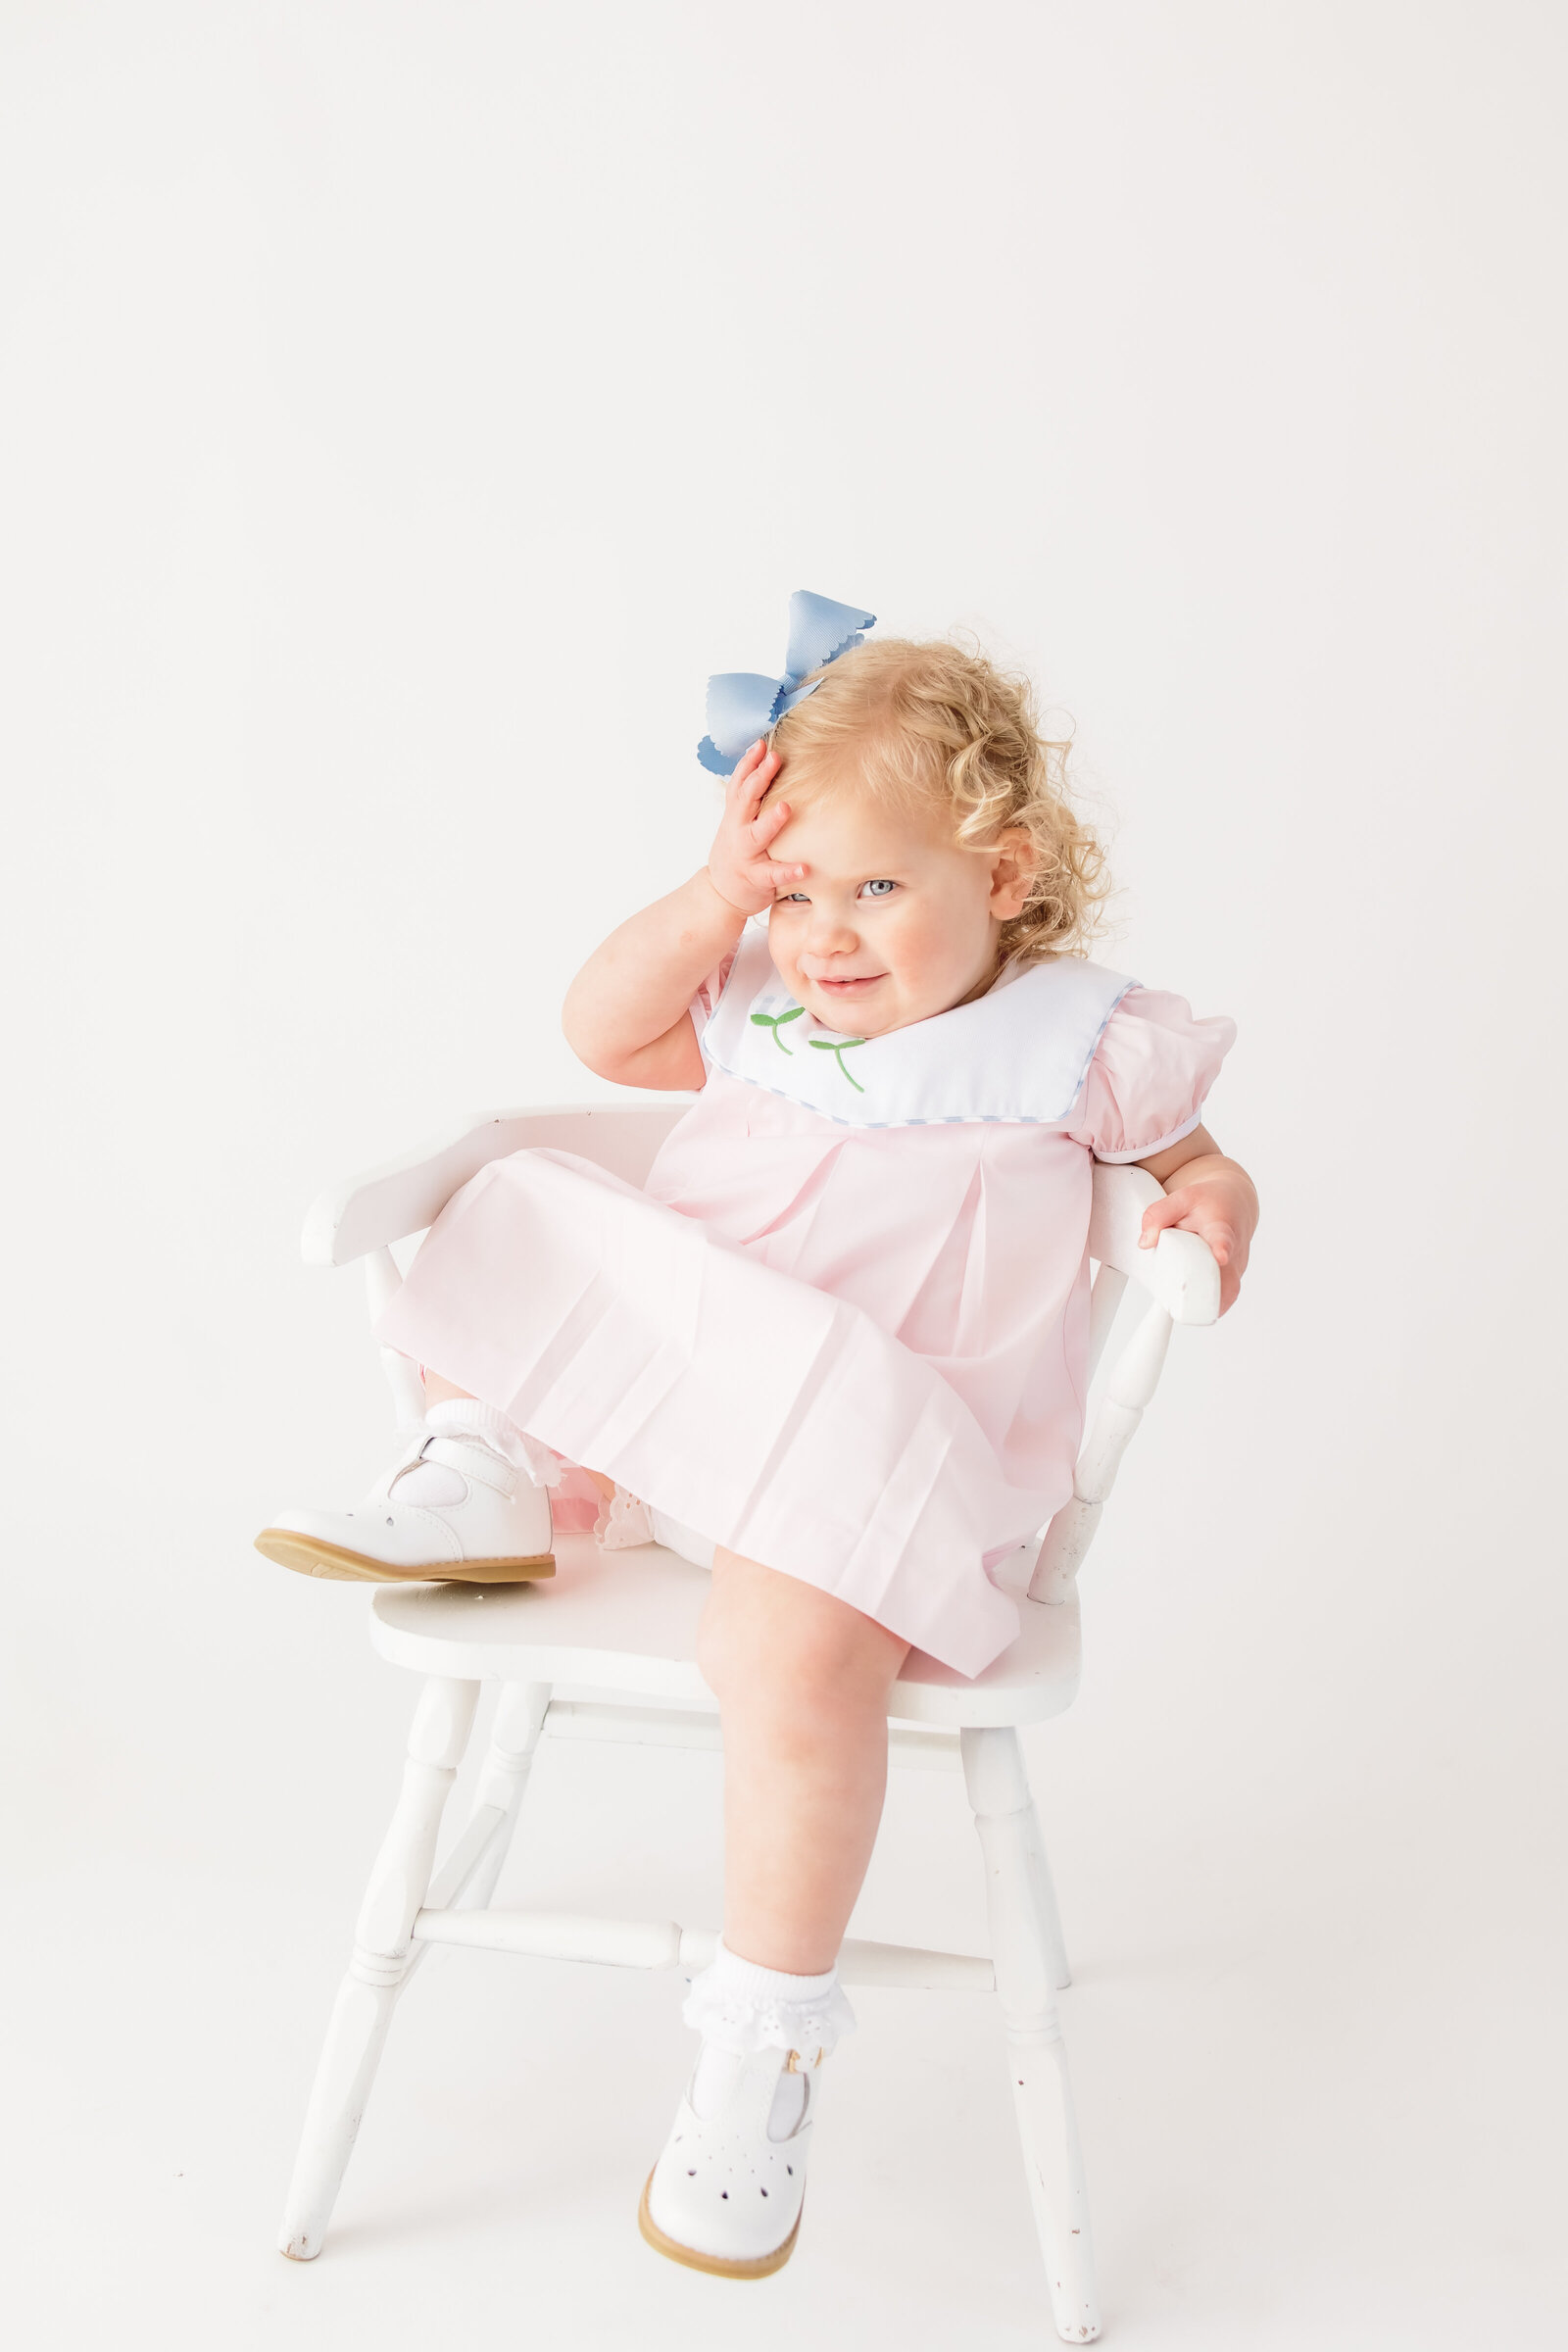 Little girl with her hand on her head  lounging on a white chair in front of a white back drop